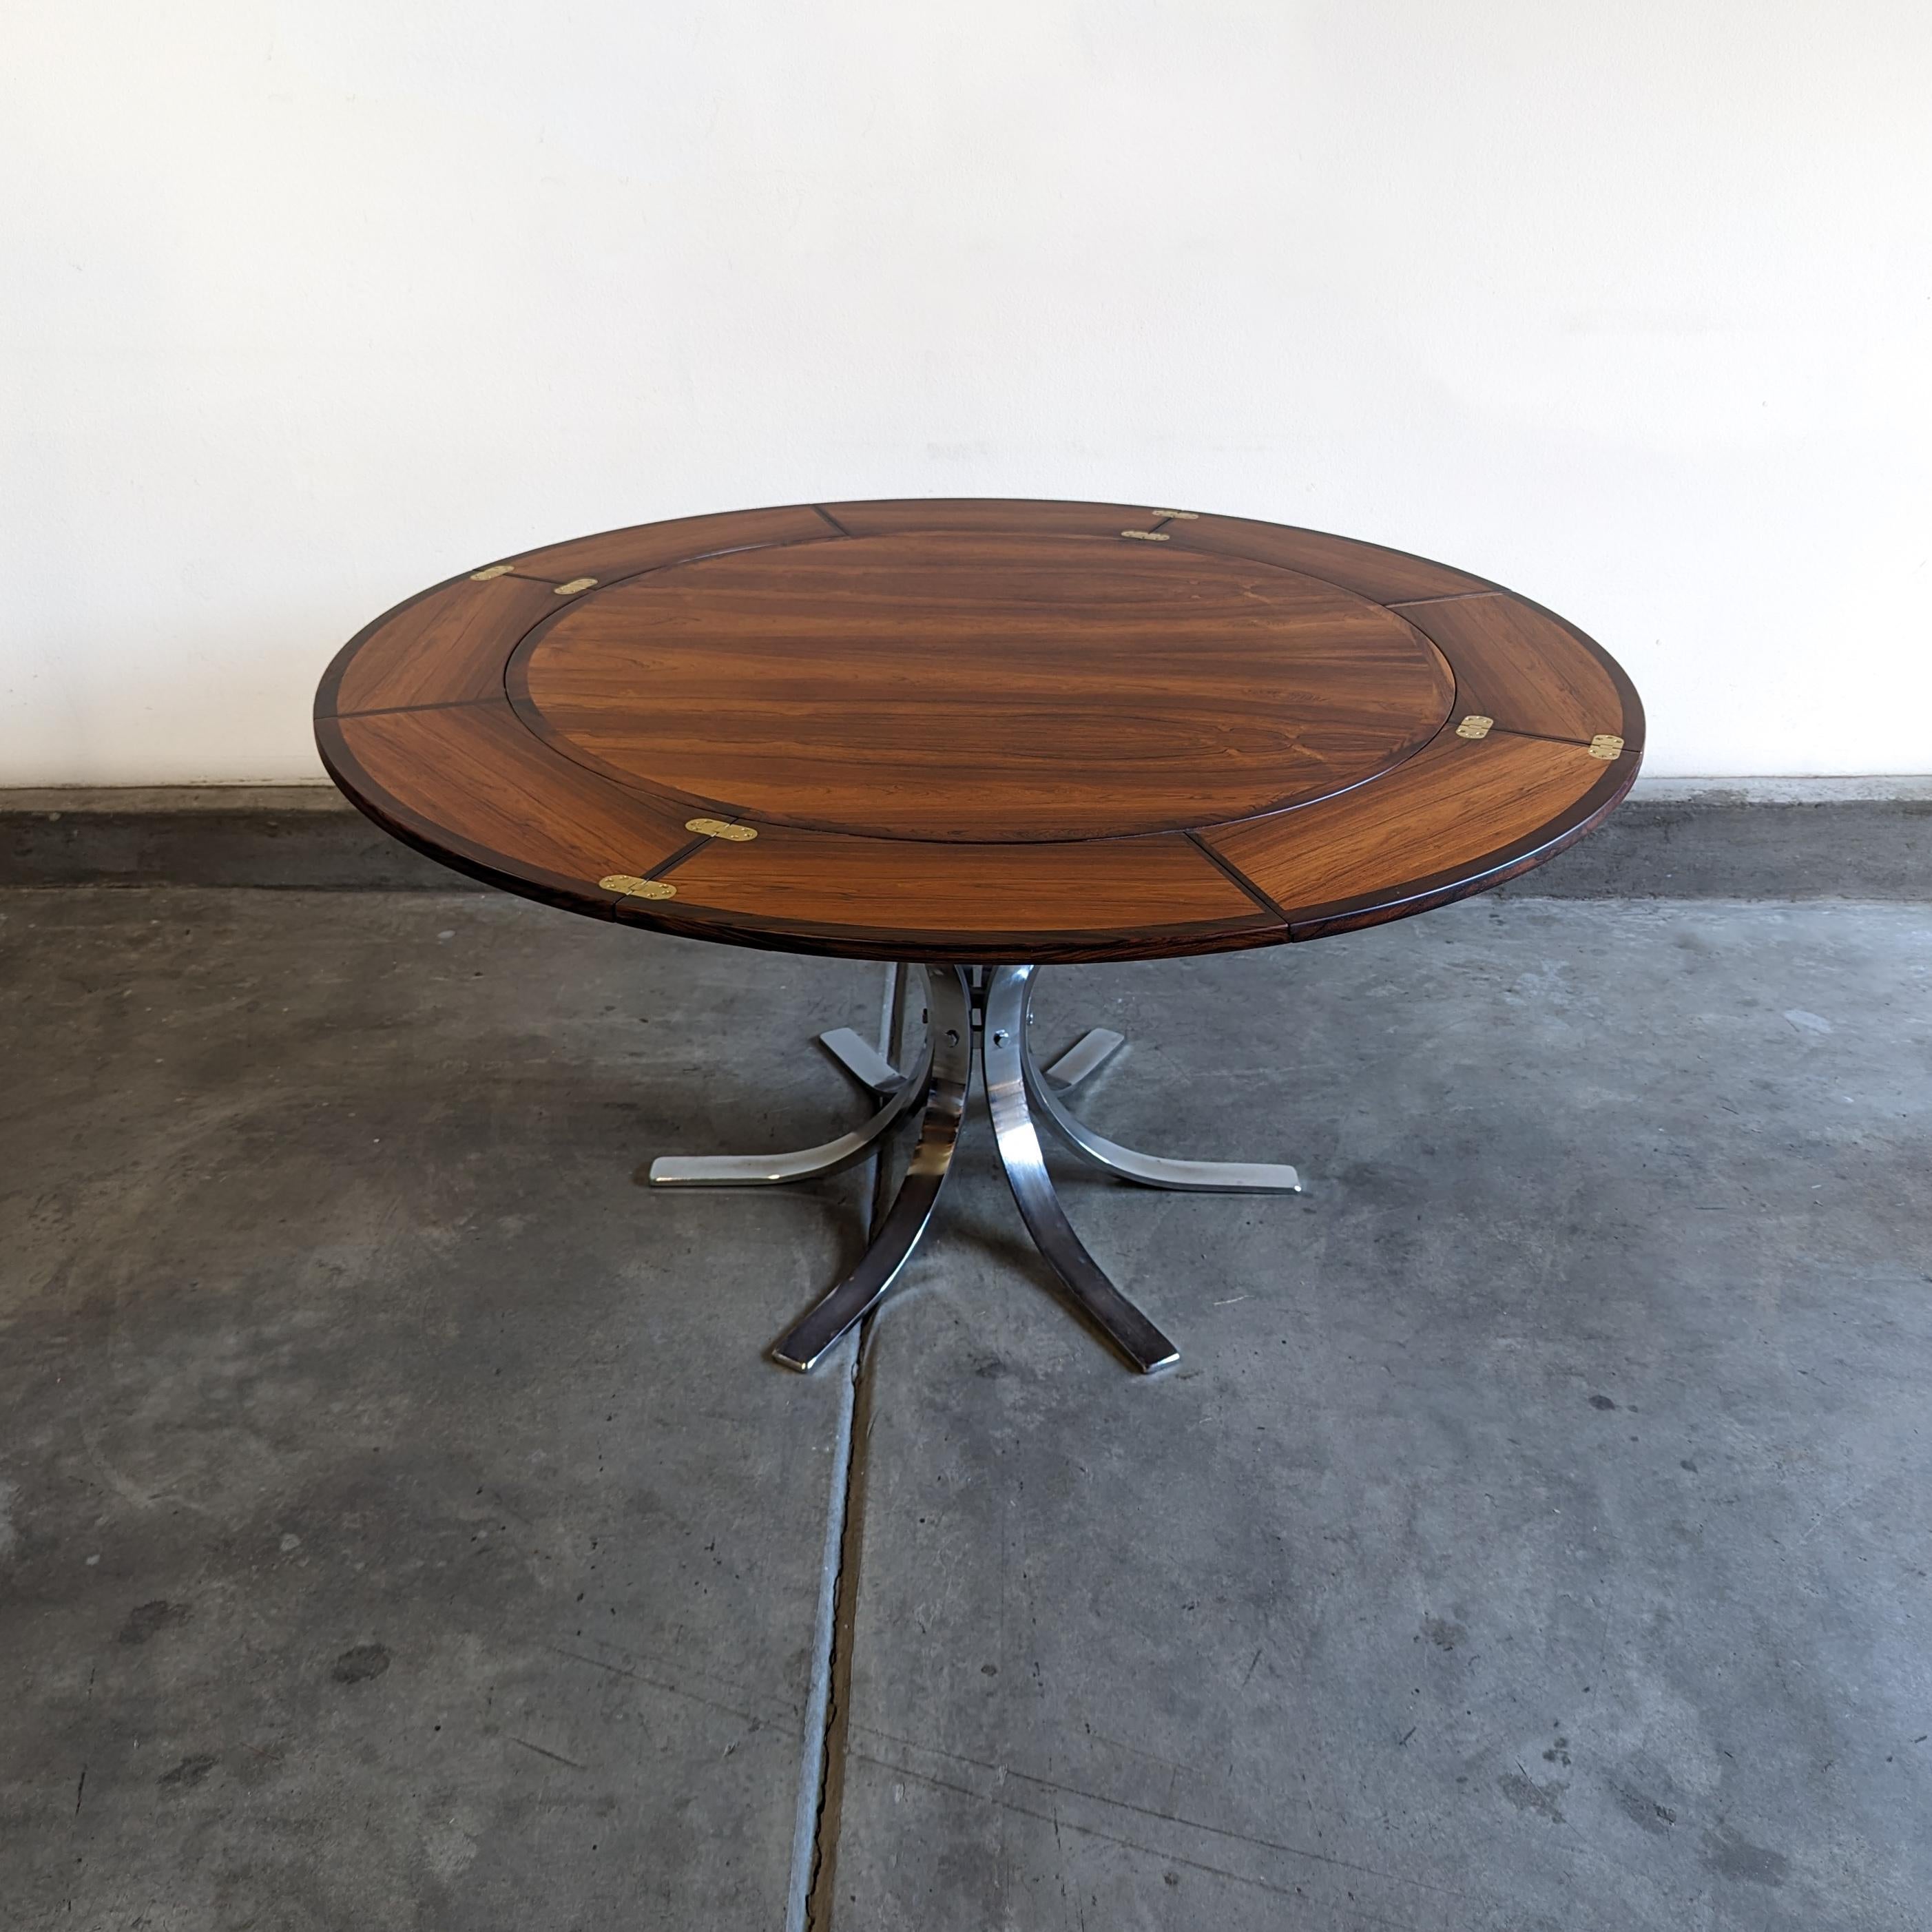 Danish Mid Century Rosewood Flip Flap Circular Dining Table by Dyrlund, c1960s In Excellent Condition For Sale In Chino Hills, CA